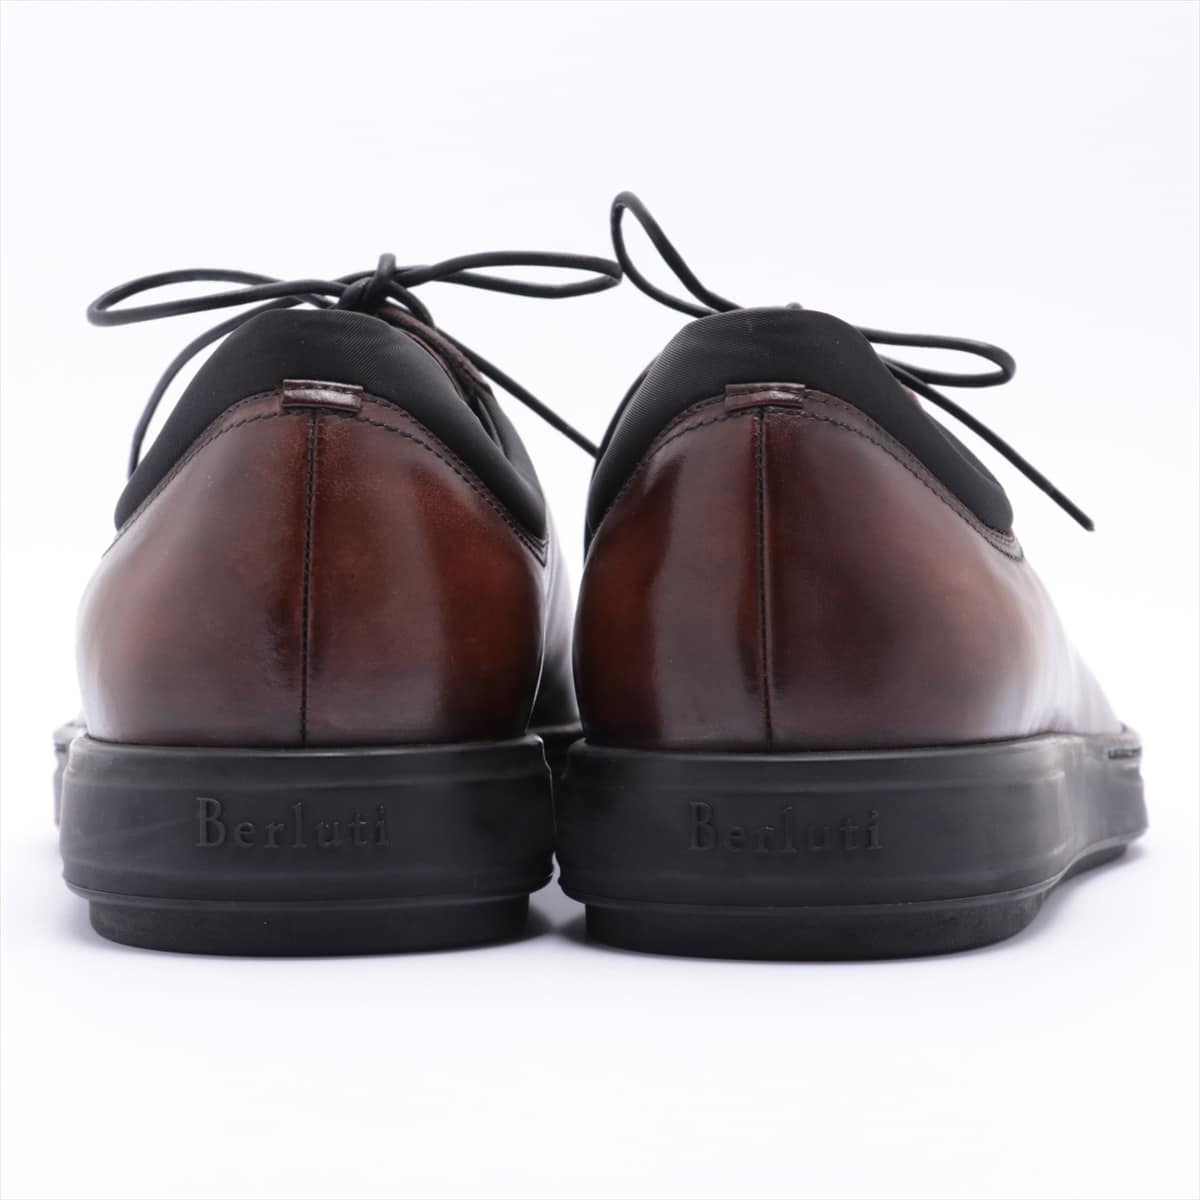 Berluti Leather Leather shoes 9 Men's Brown 4557